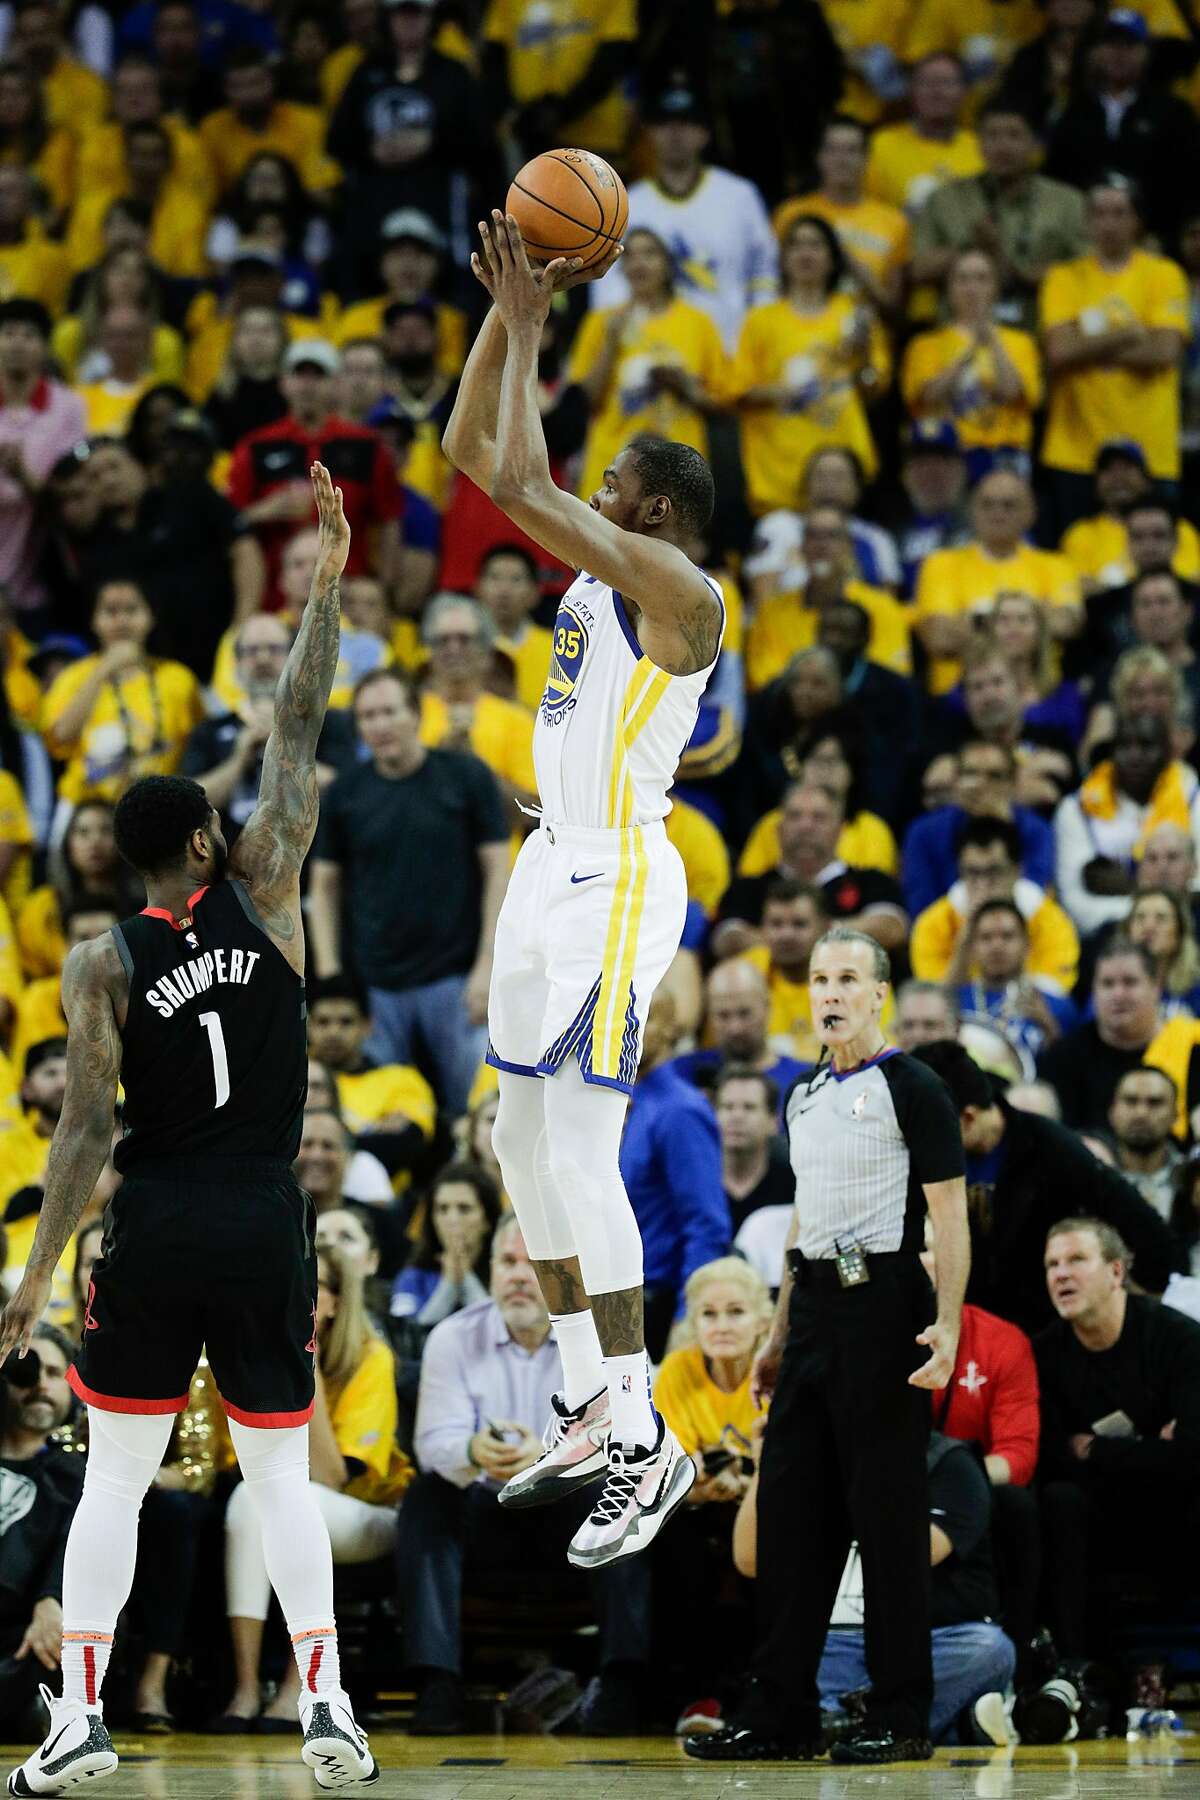 Golden State Warriors Kevin Durant shoots over Houston Rockets Iman Shumpert in the third quarter during game 5 of the Western Conference Semifinals between the Golden State Warriors and the Houston Rockets at Oracle Arena on Wednesday, May 8, 2019 in Oakland, Calif.